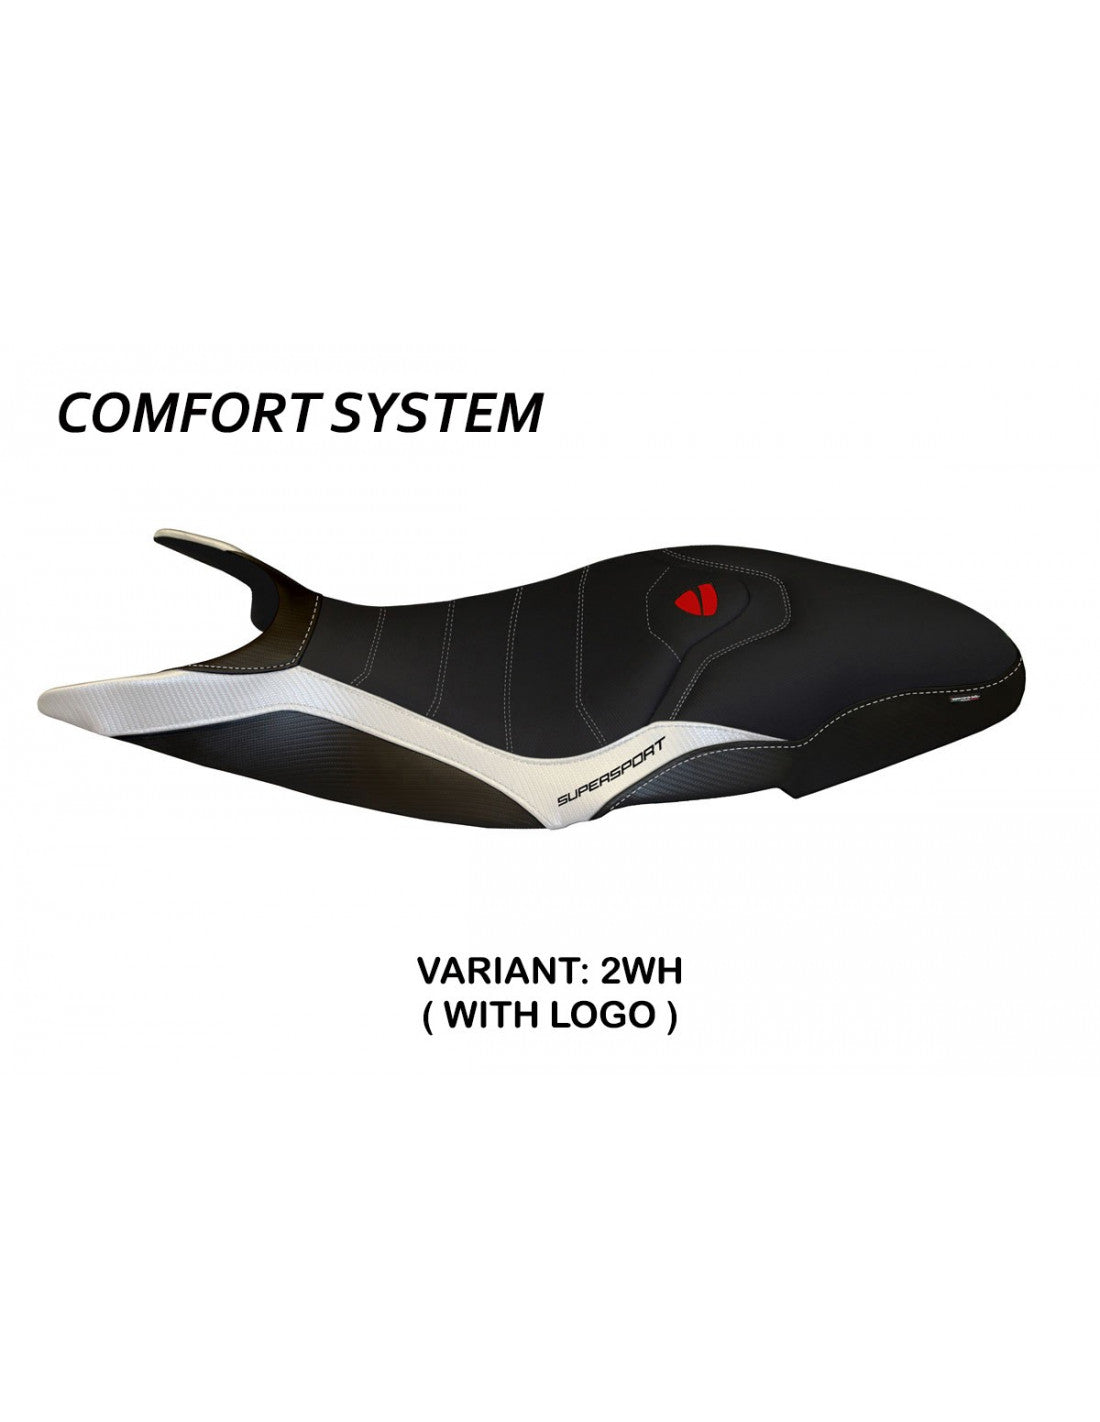 Tappezzeria Pistoia 3 Comfort System Seat Cover for Ducati SuperSport